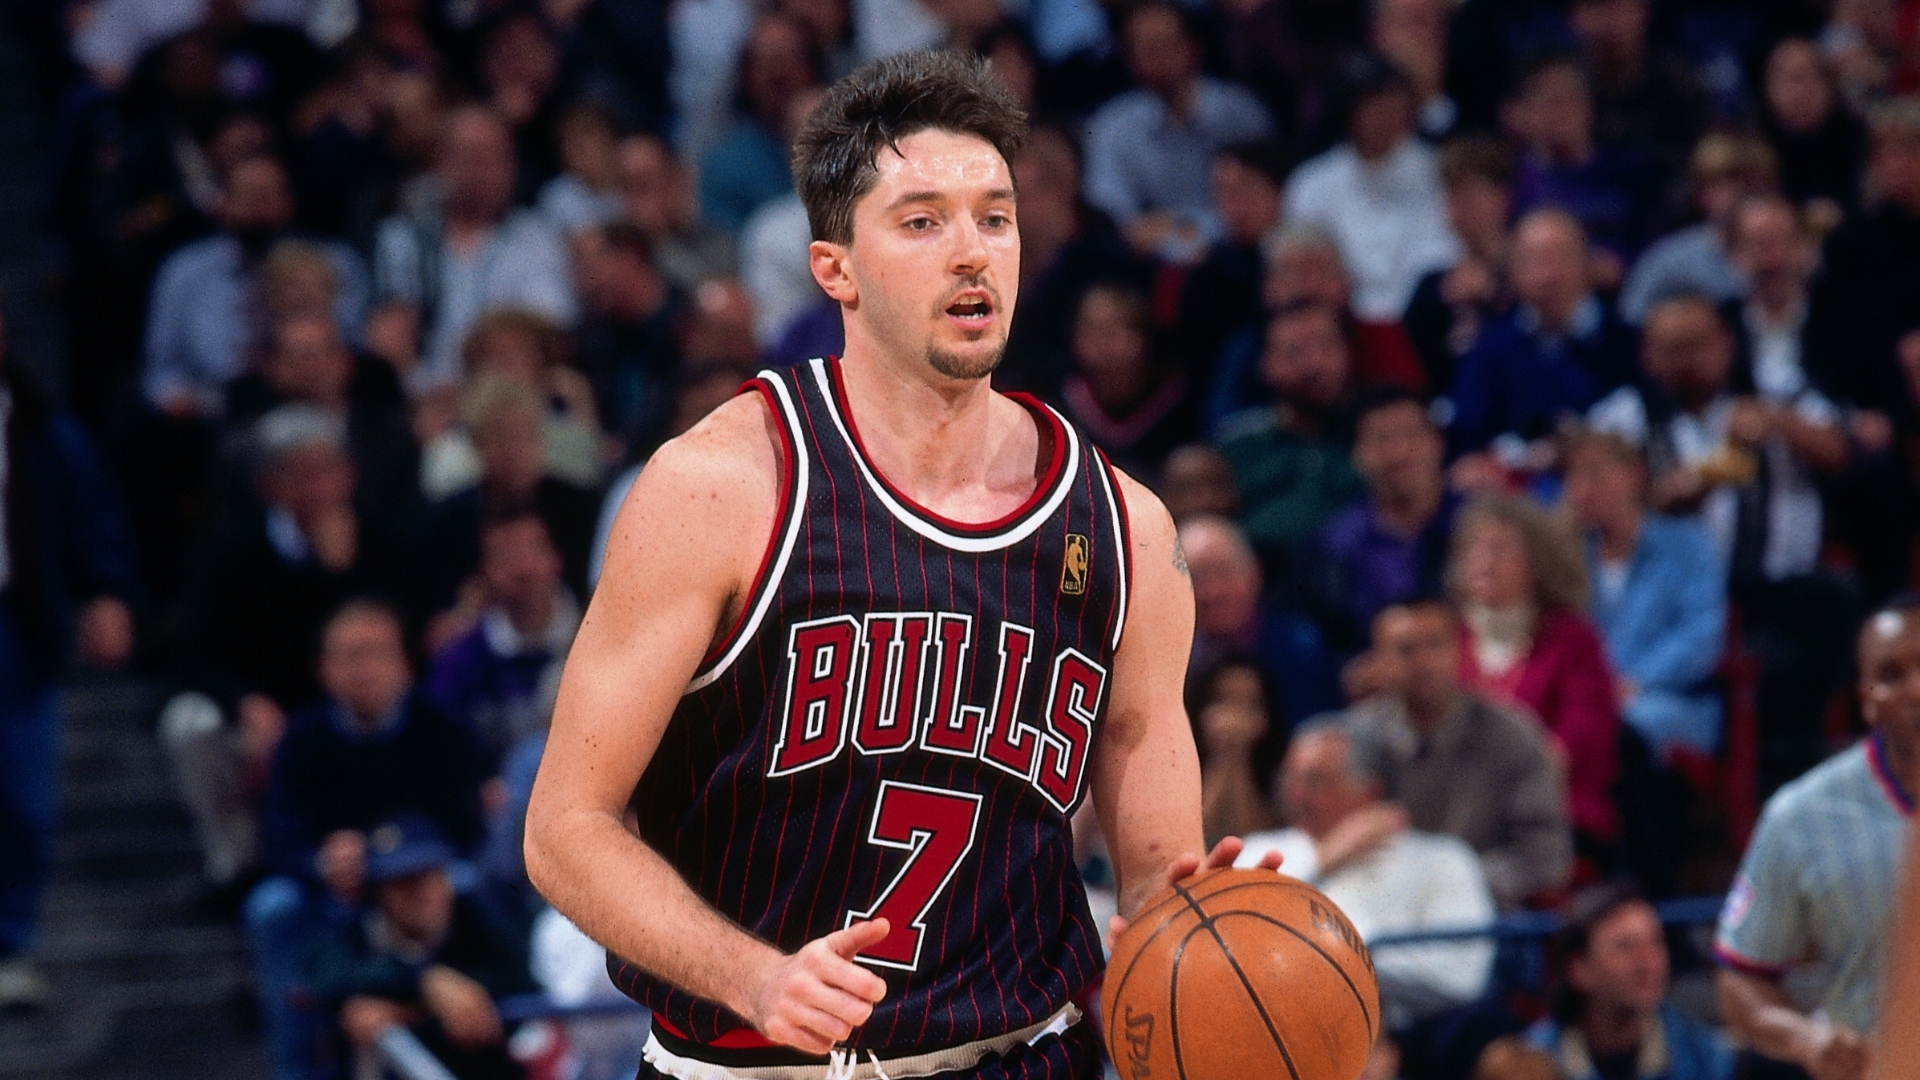 Who Is Toni Kukoc? Fast Facts On The Versatile Croatian Forward Of 'The Last Dance' Chicago Bulls | Nba.com India | The Official Site Of The Nba